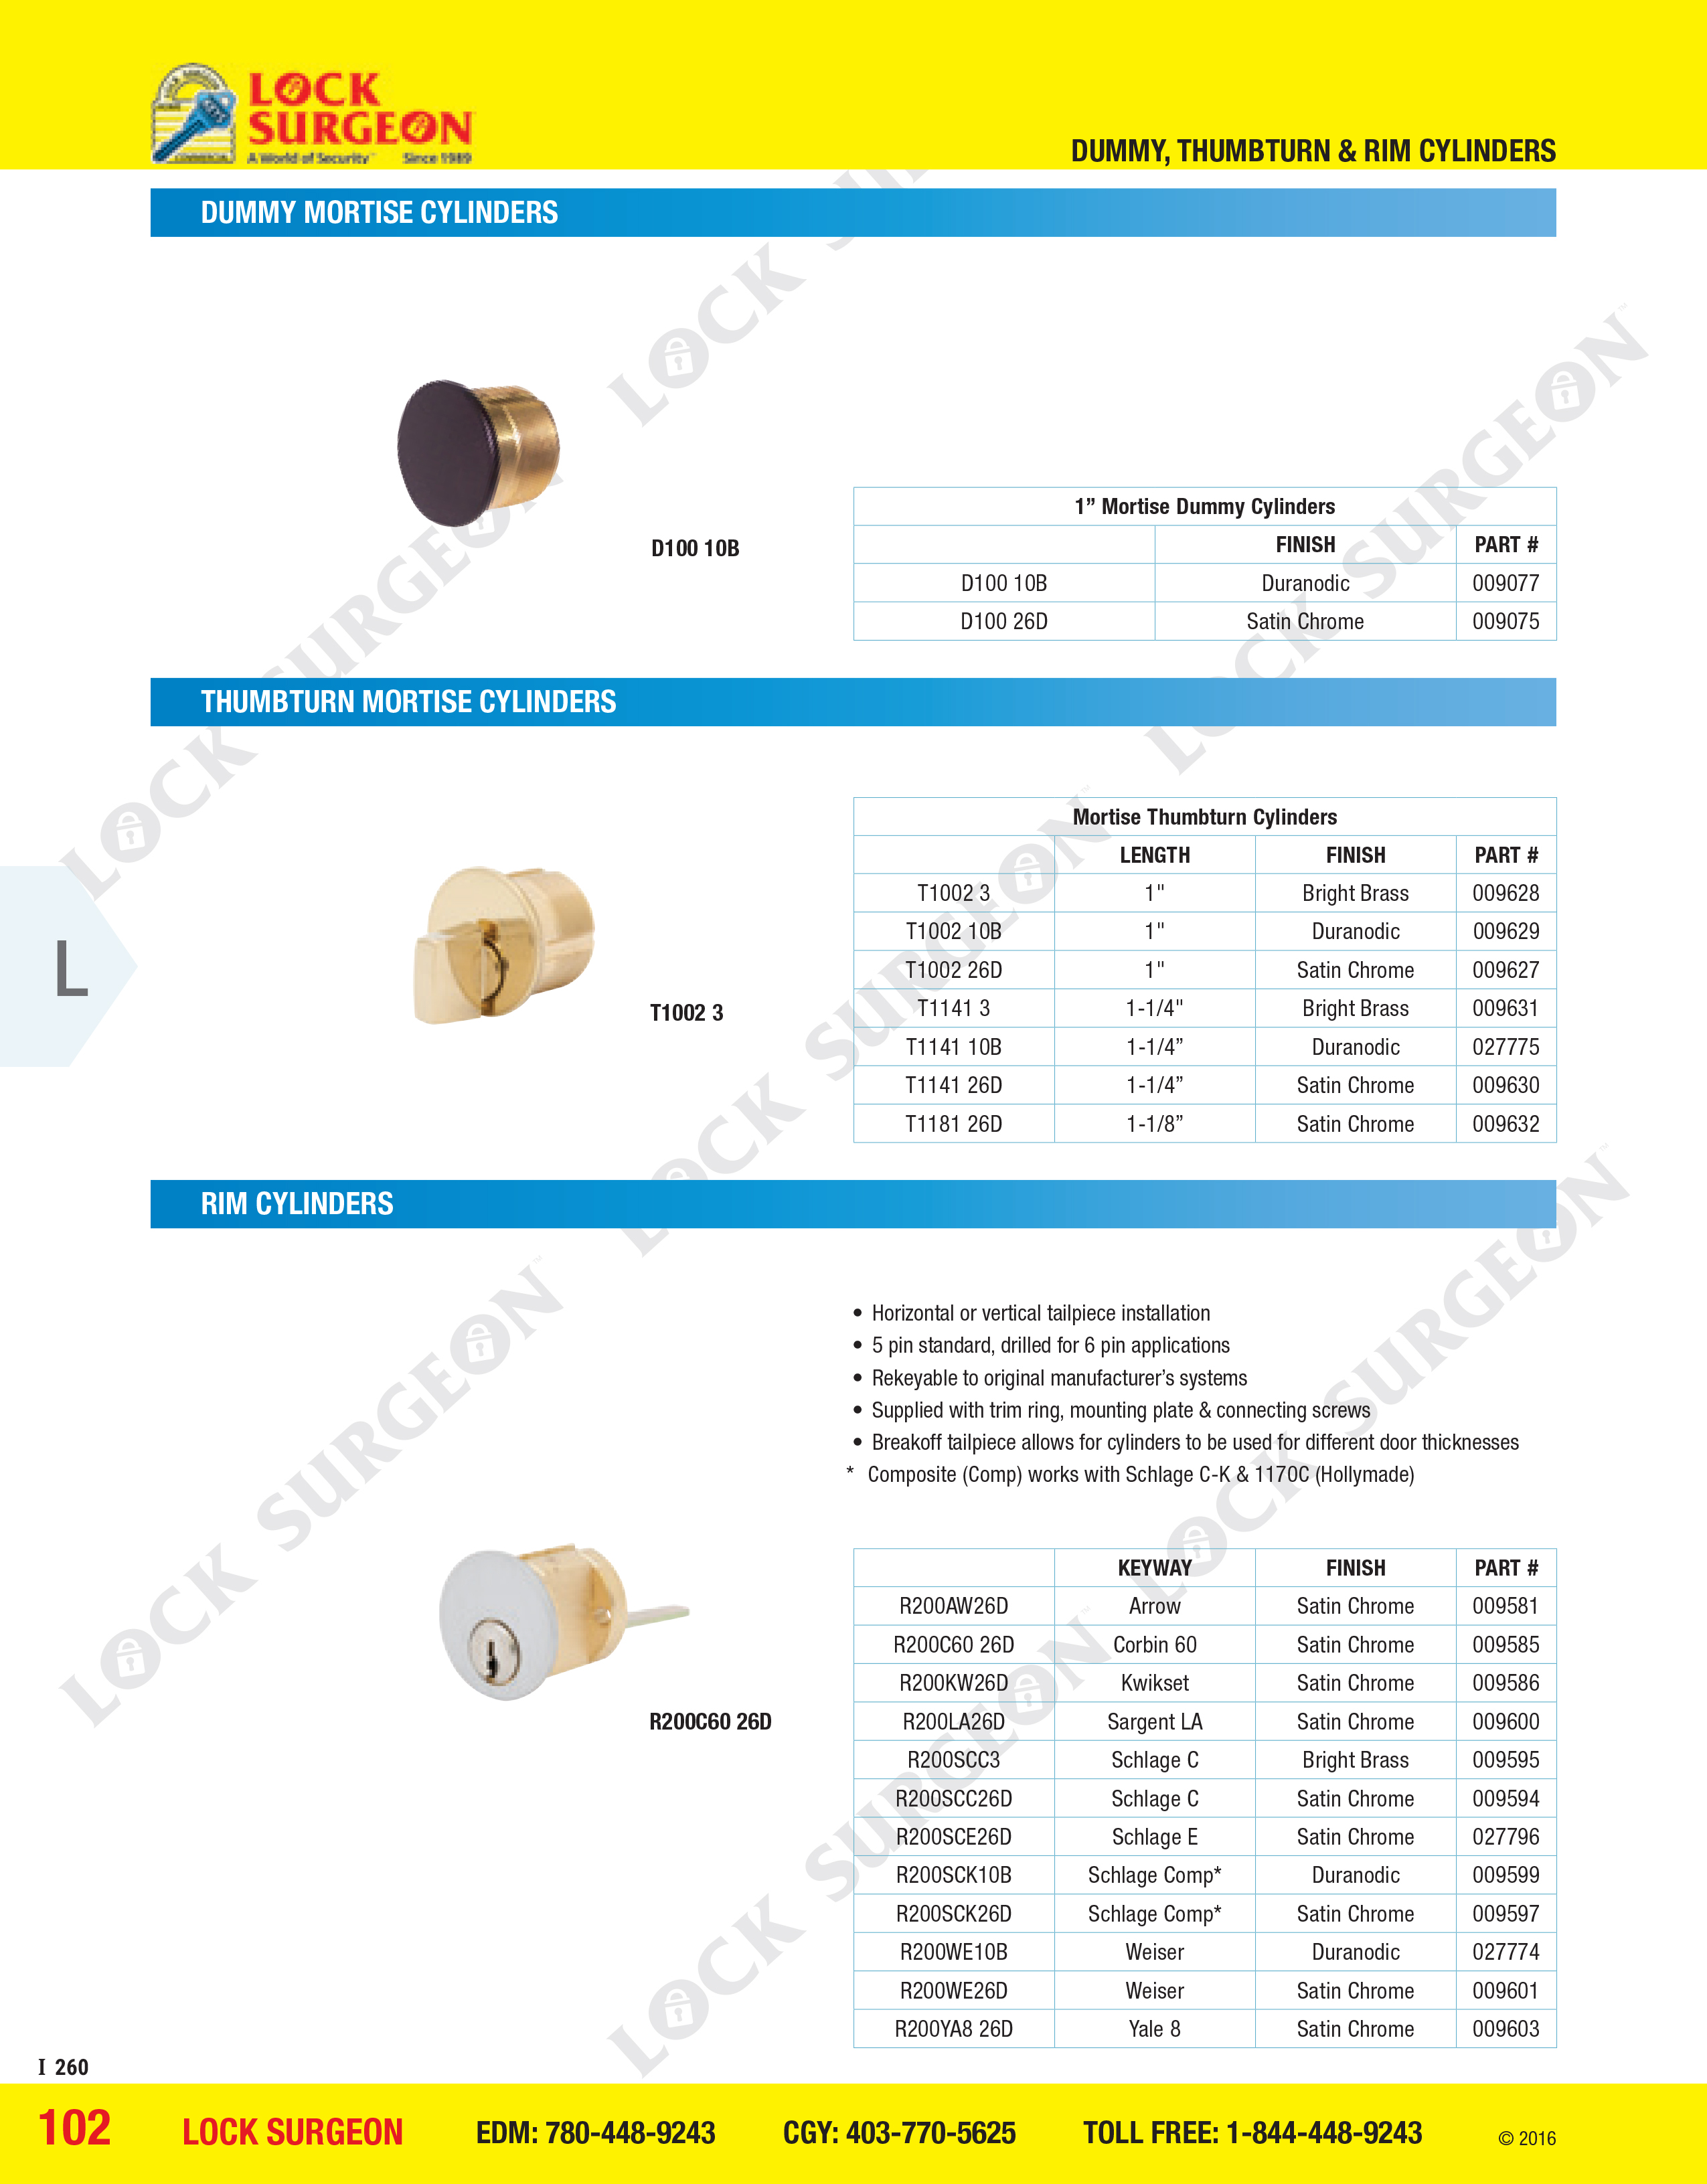 Dummy mortise cyliders, thumbturn mortise cylinders, rim cylinders